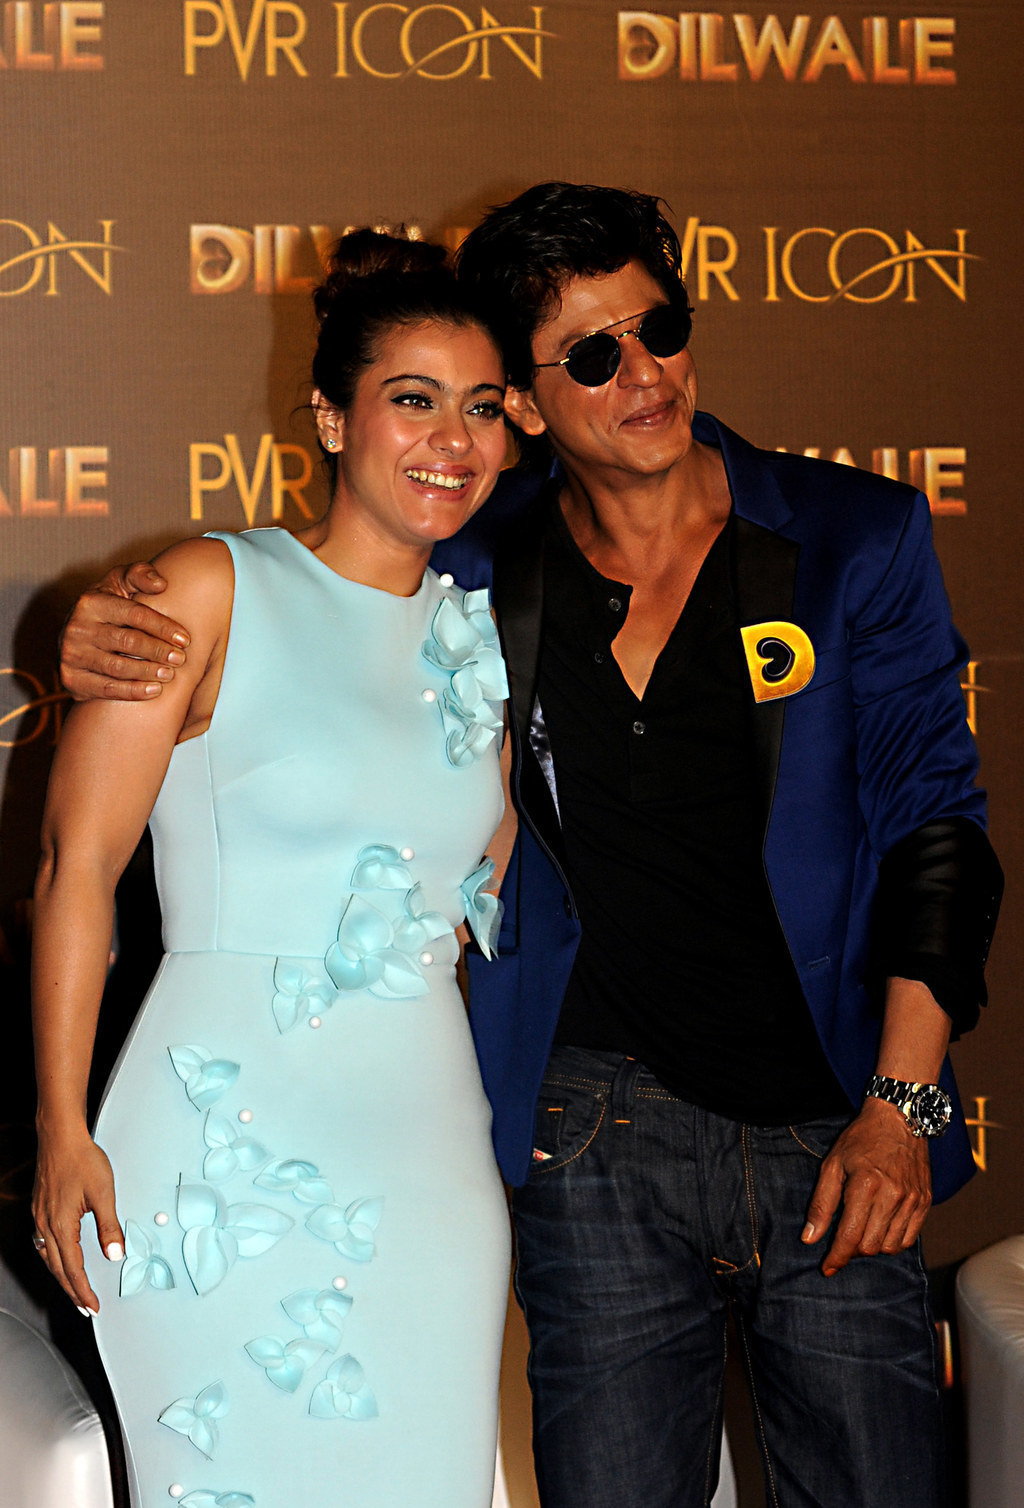 This Is For Everyone Who Likes To Pretend Shah Rukh Khan And Kajol Are Dating